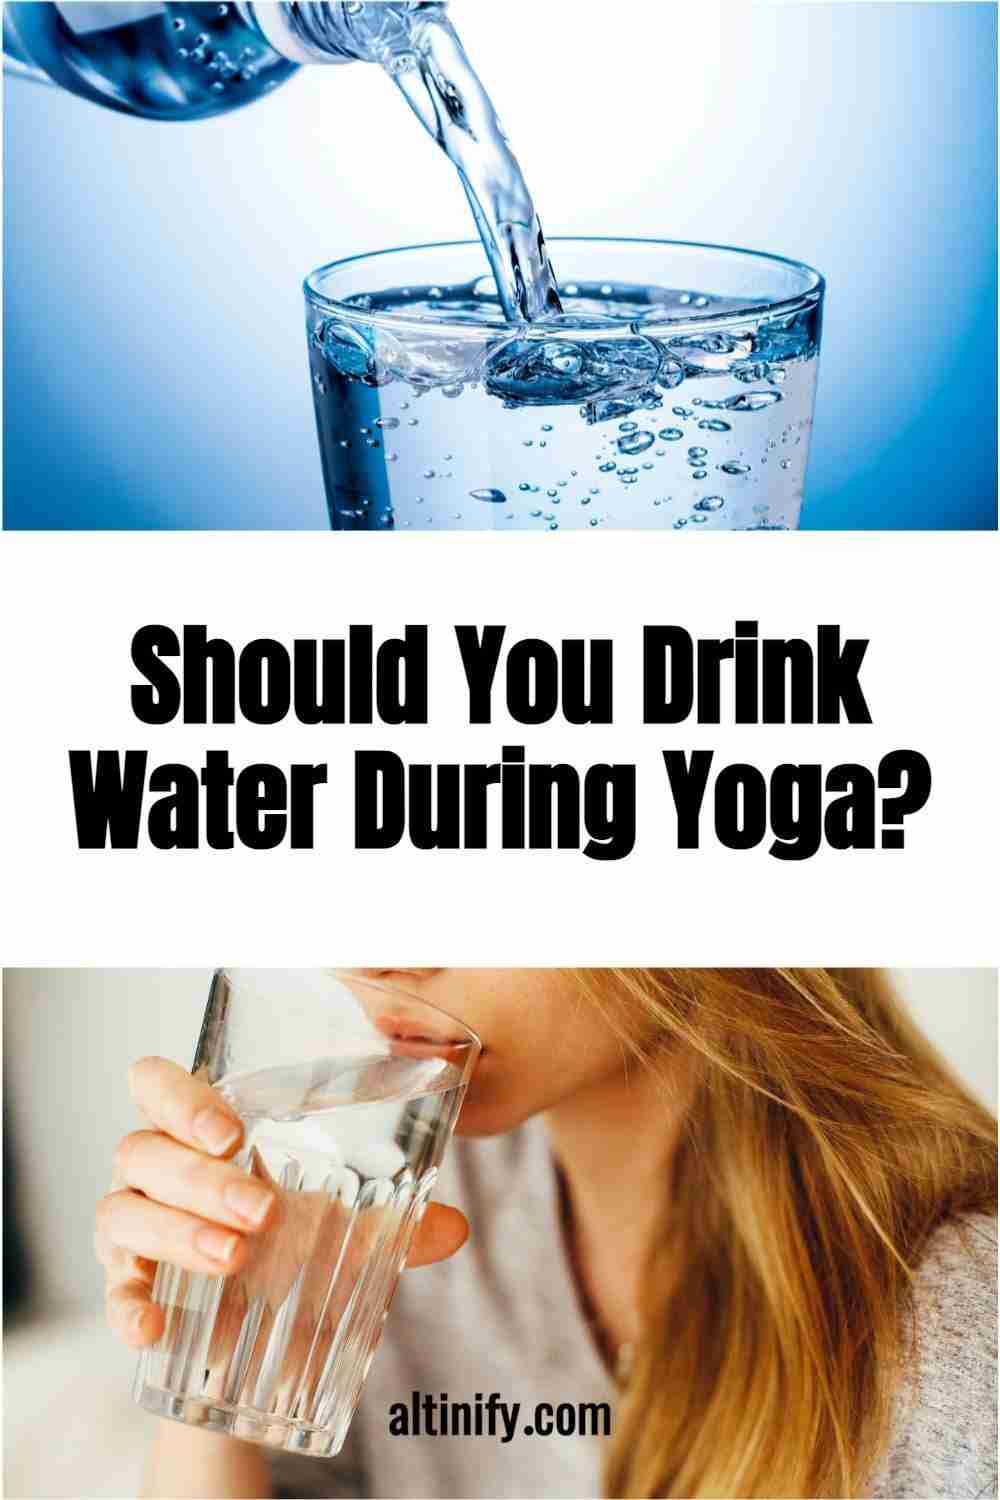 Should You Drink Water During Yoga?